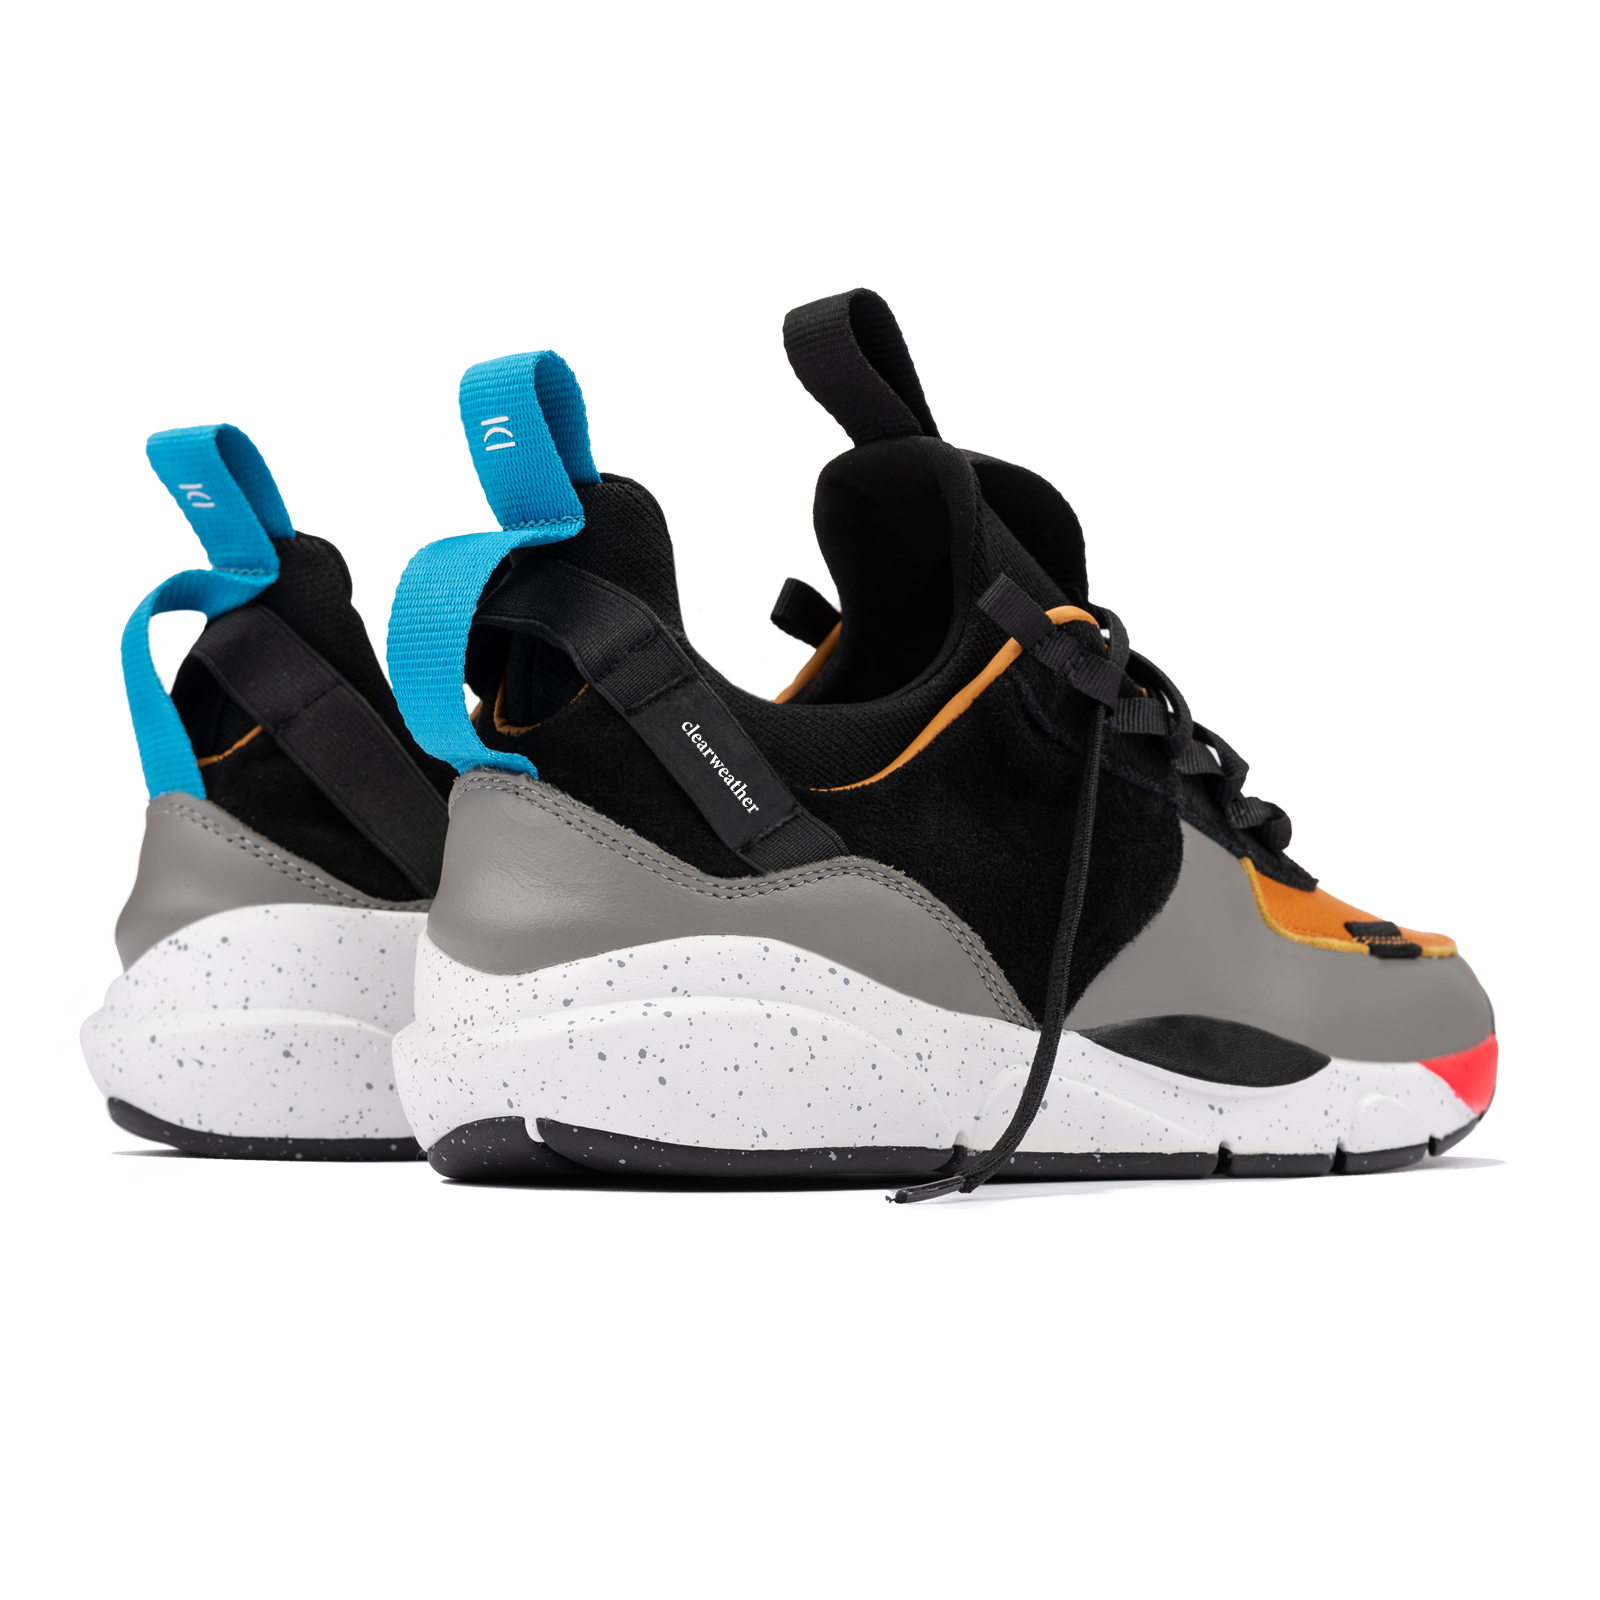 Back 3/4 view, The Contera Kalahari is a Runner with grey leather black suede and tabaco orange leather, Blue webbing heel pull, Black webbin tongue pull, Black webbing lace system, painted eva midsole ande black rubber outsole.